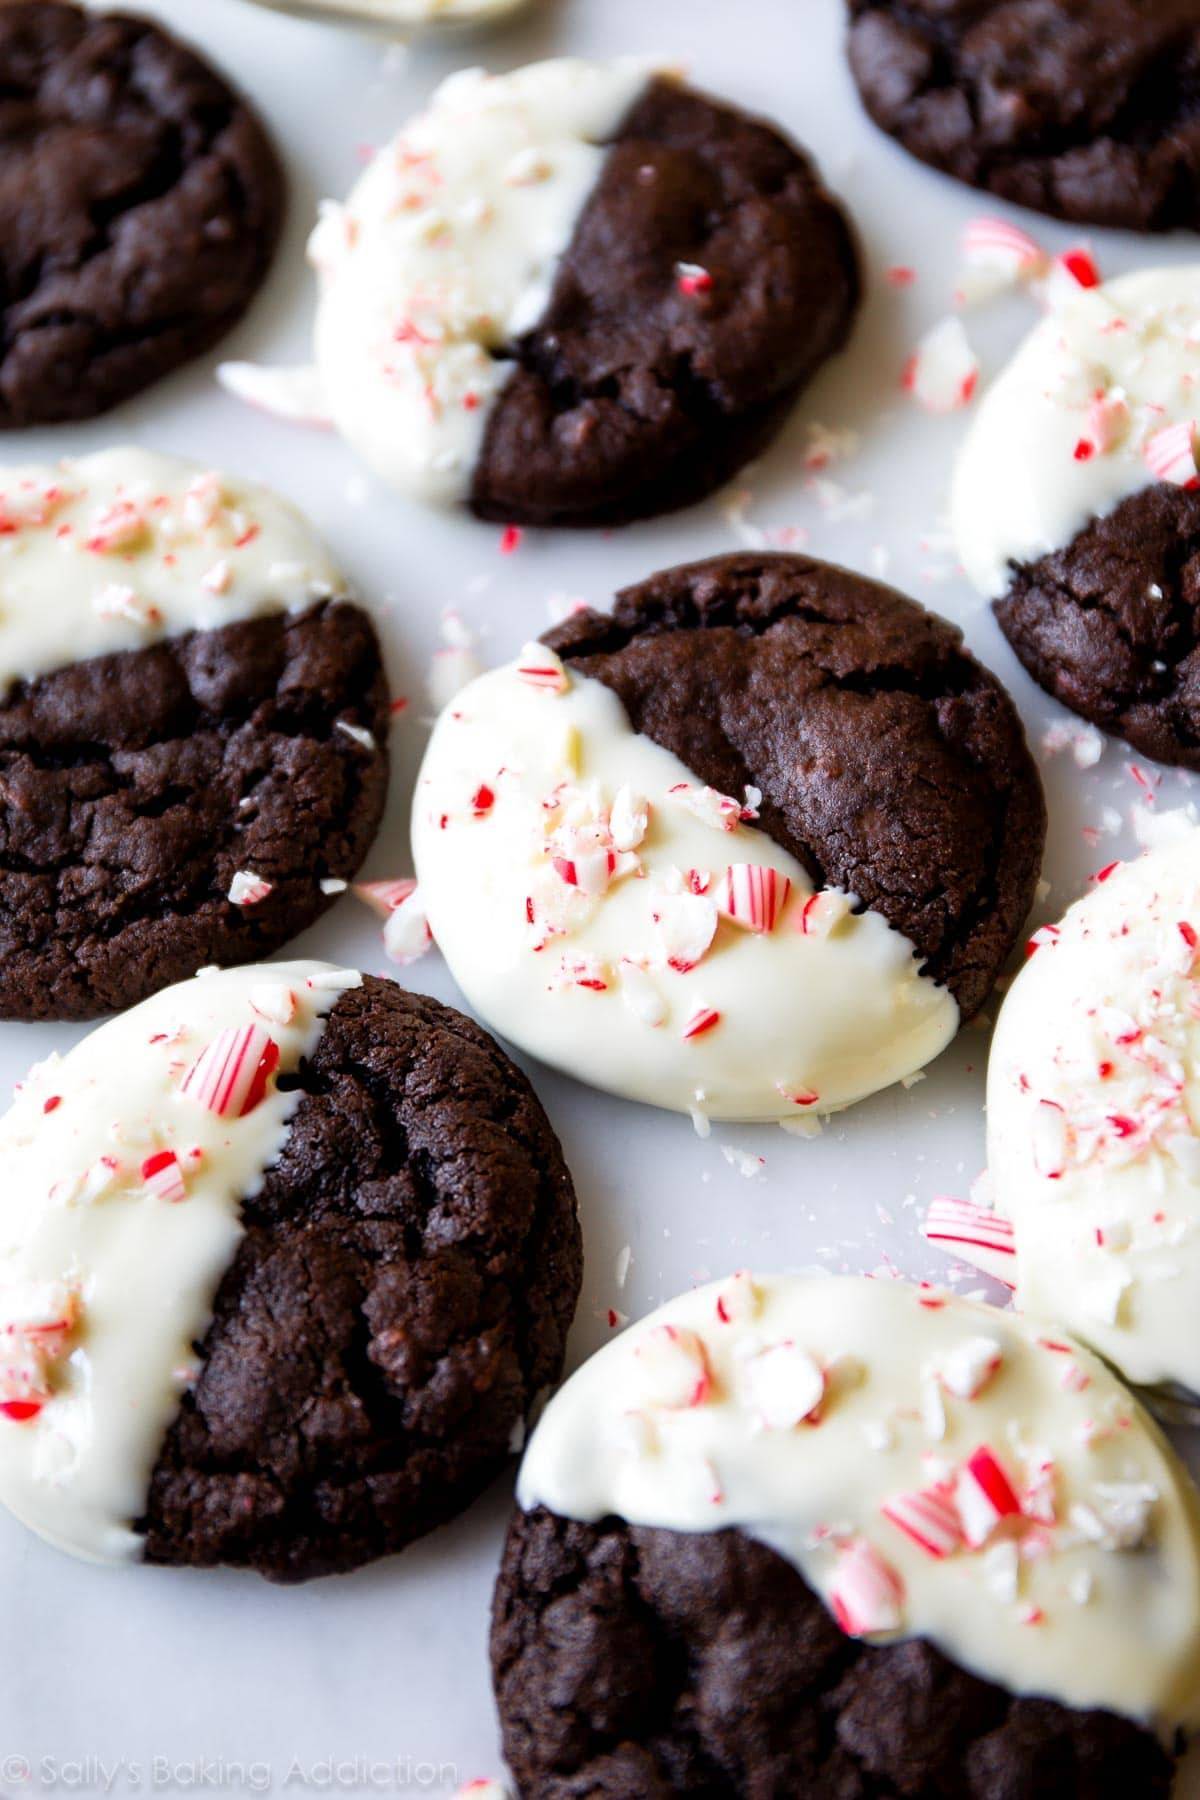 Chocolate cookies half frosted with peppermint on top.